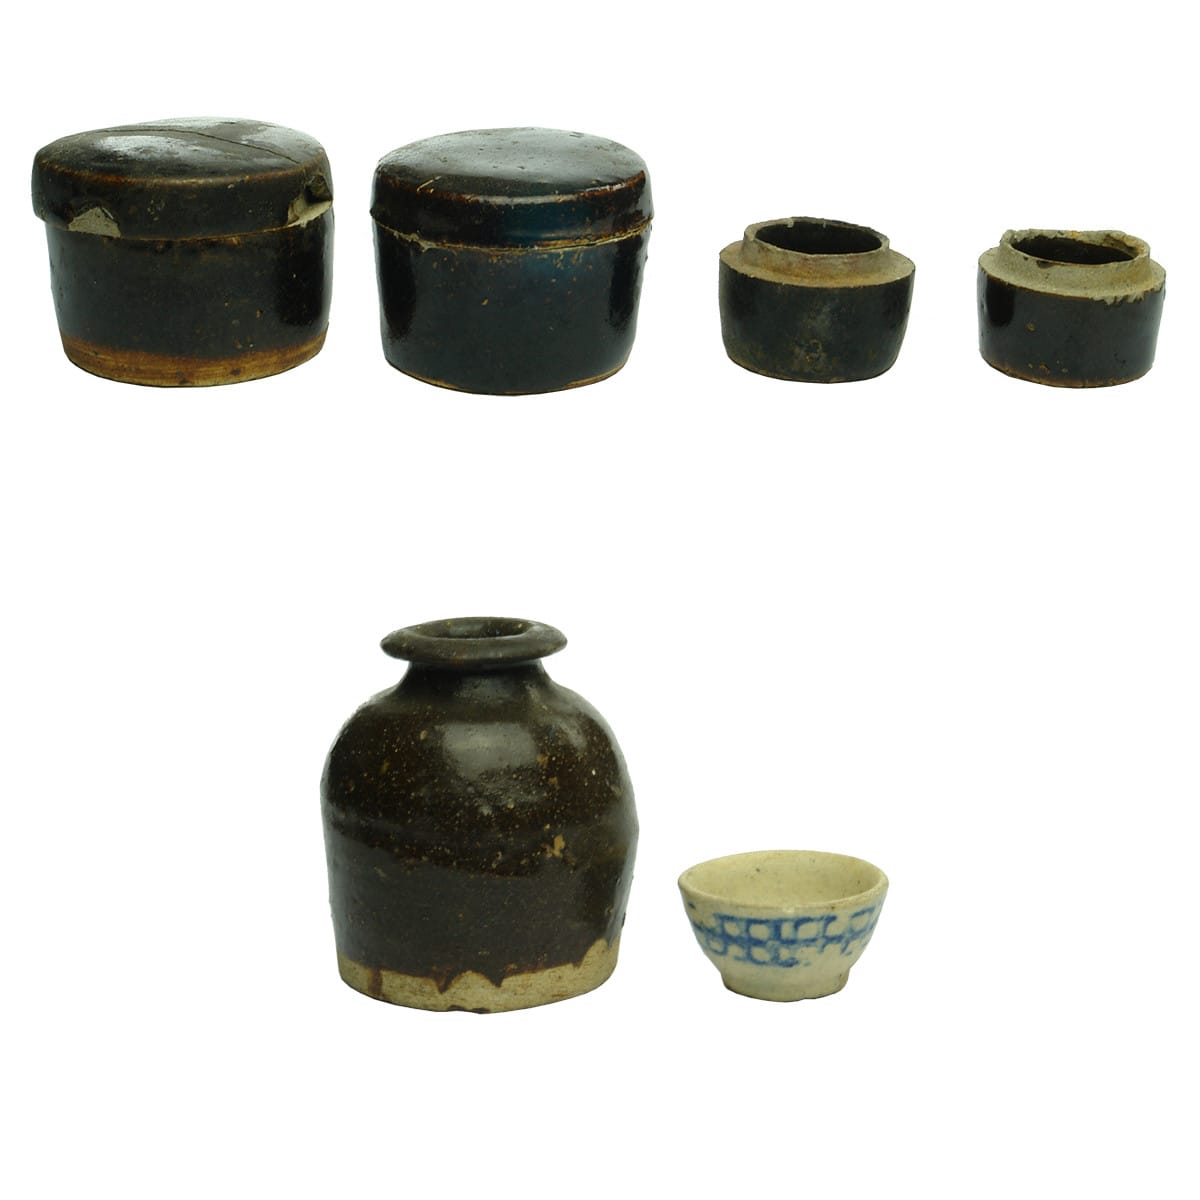 6 small Chinese items. 5 brown glaze pieces, two round boxes with lids, 2 smaller ones without lids, small oil jar and a tiny blue & white cup.